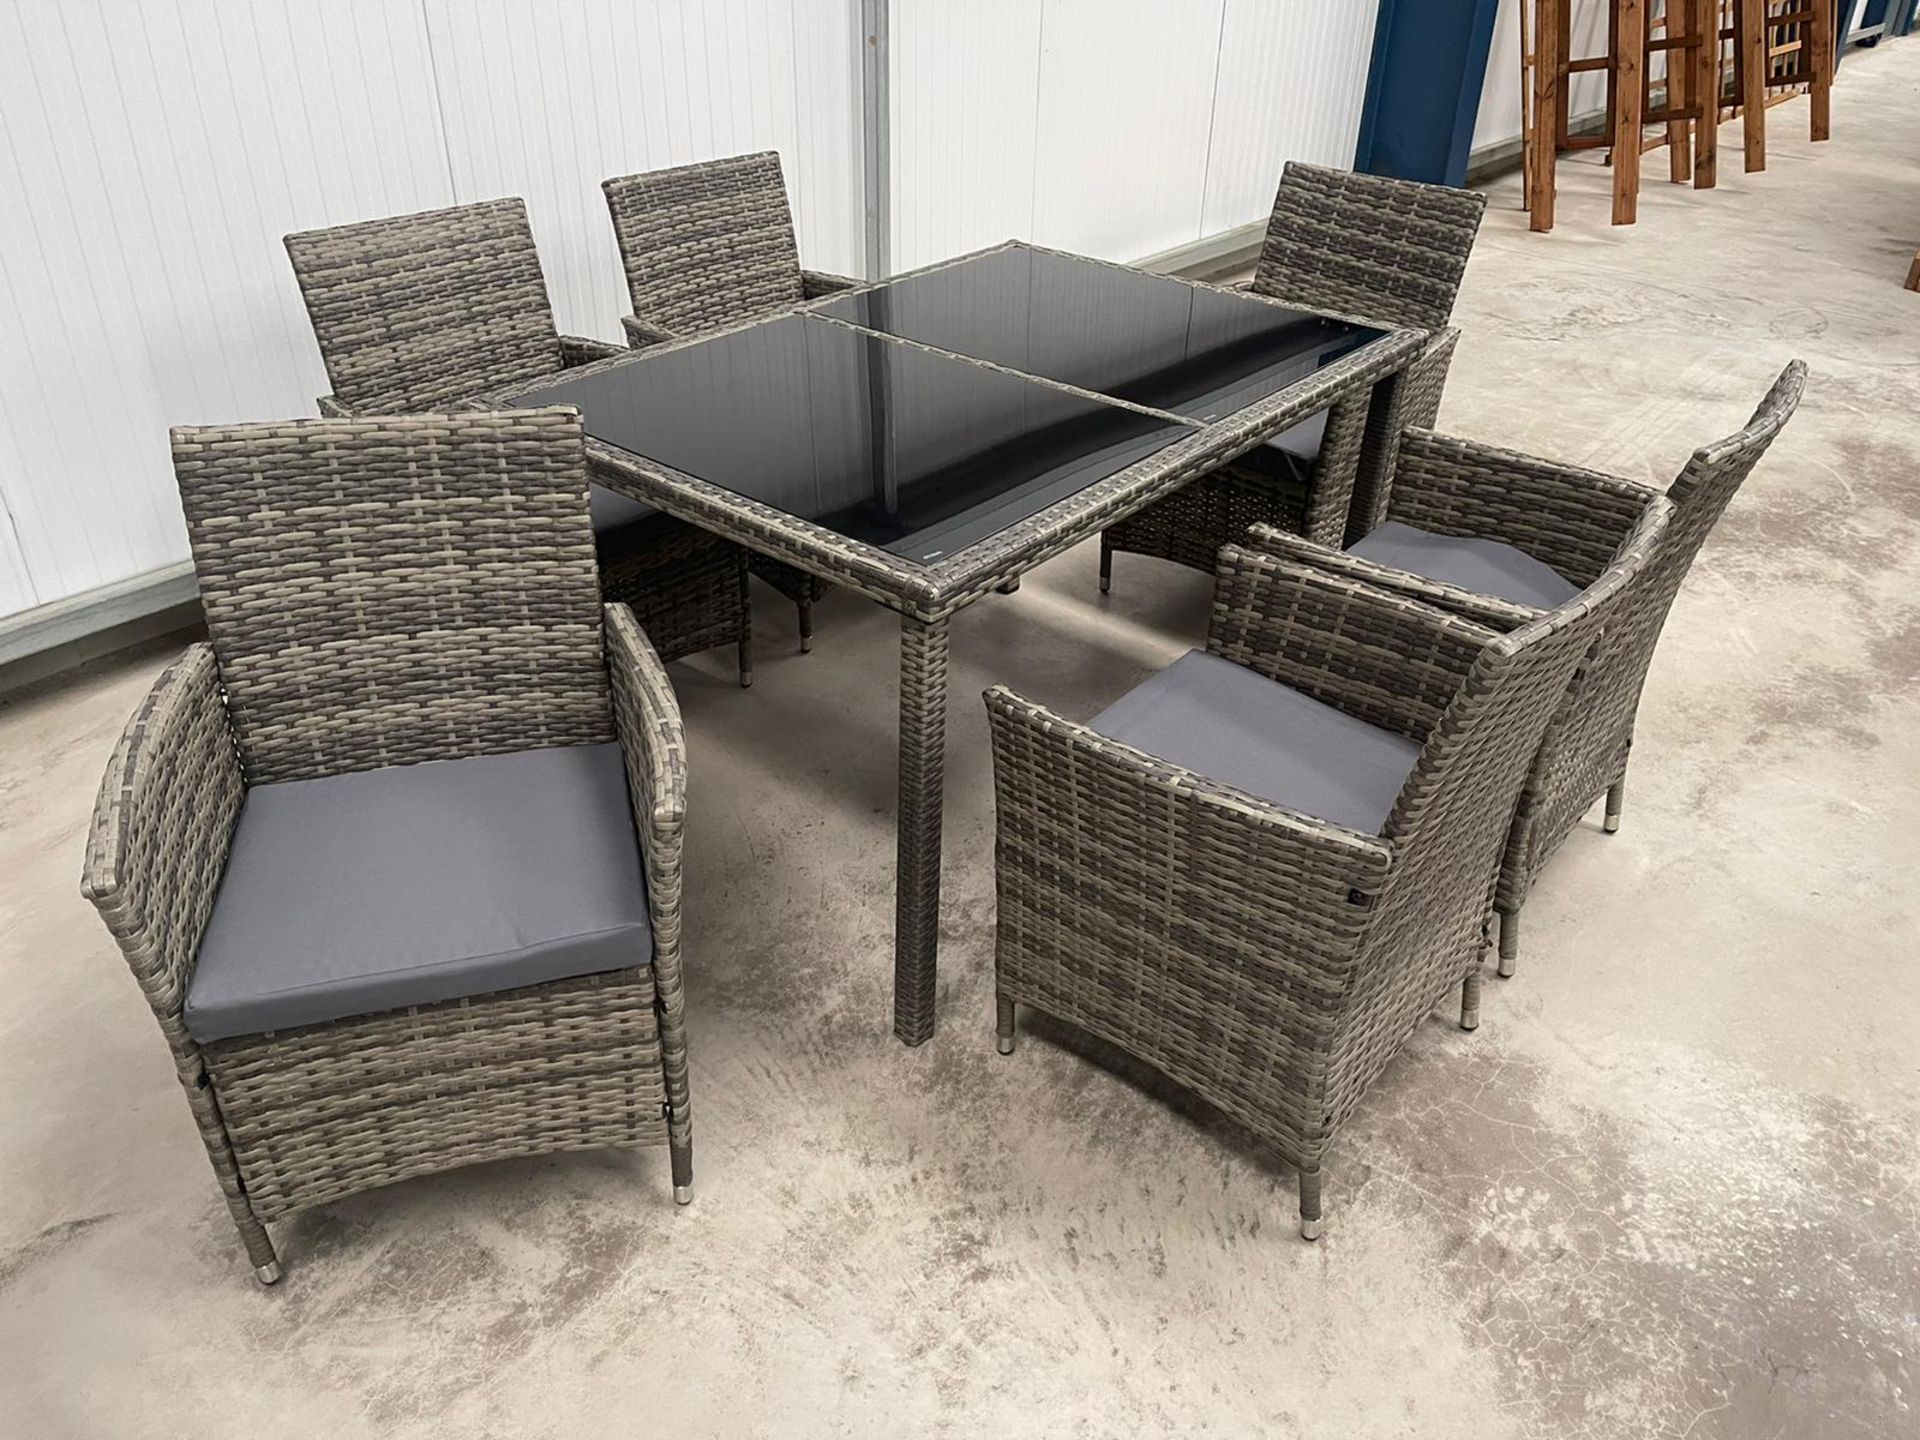 RRP £999 - NEW GREY SIX SEAT DINING SET WITH SIX CHAIRS - LUXURY BLACK GLASS TOPPED DINING TABLE AND - Image 3 of 5